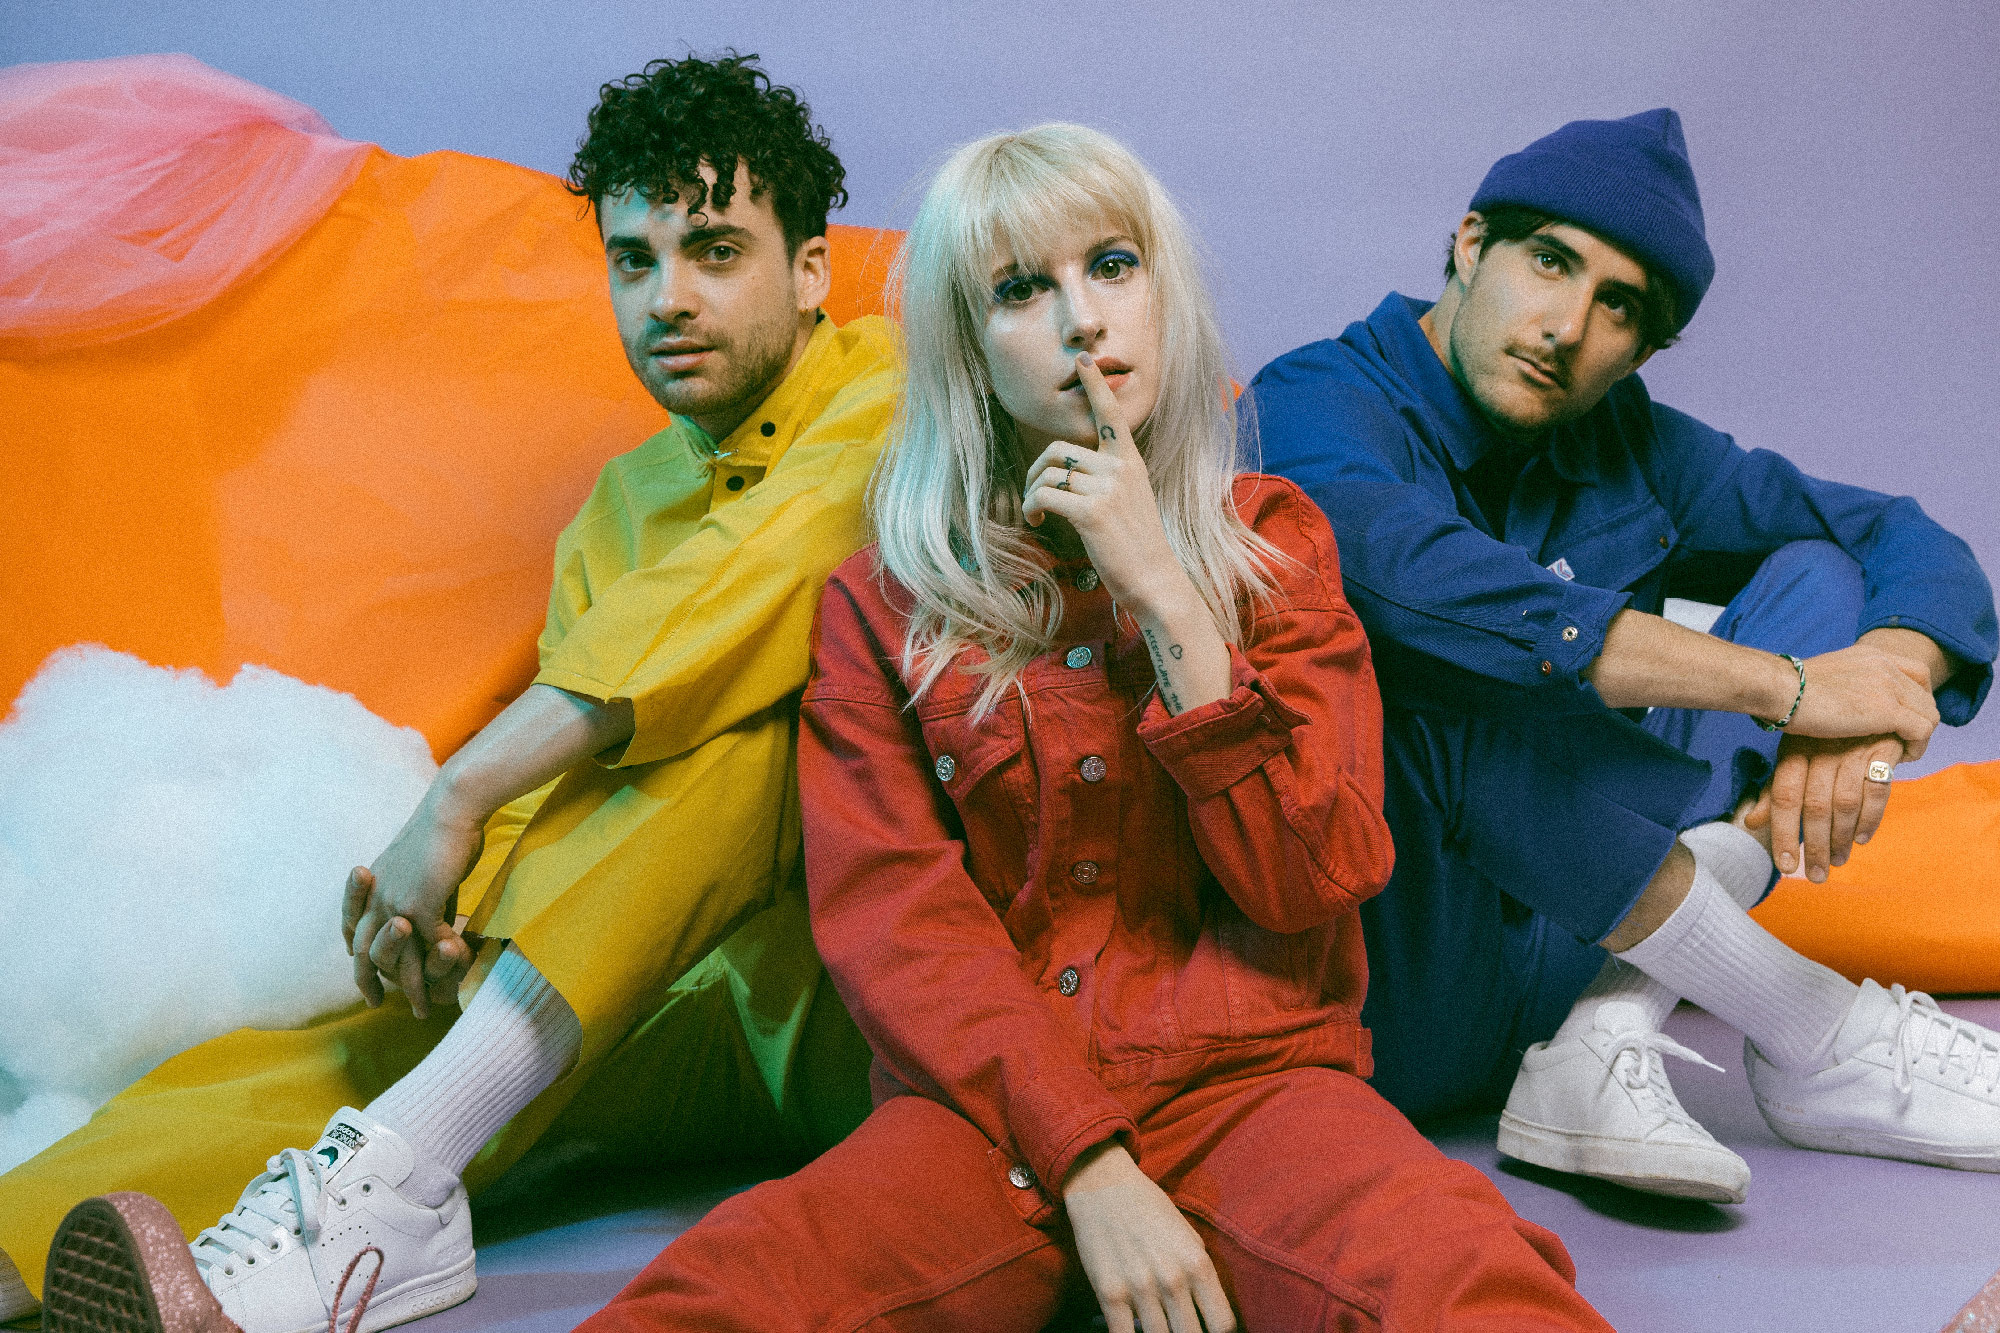 Paramore: The tour with New Found Glory and Kids in Glass Houses, The promotion of the release of Riot!. 2000x1340 HD Wallpaper.